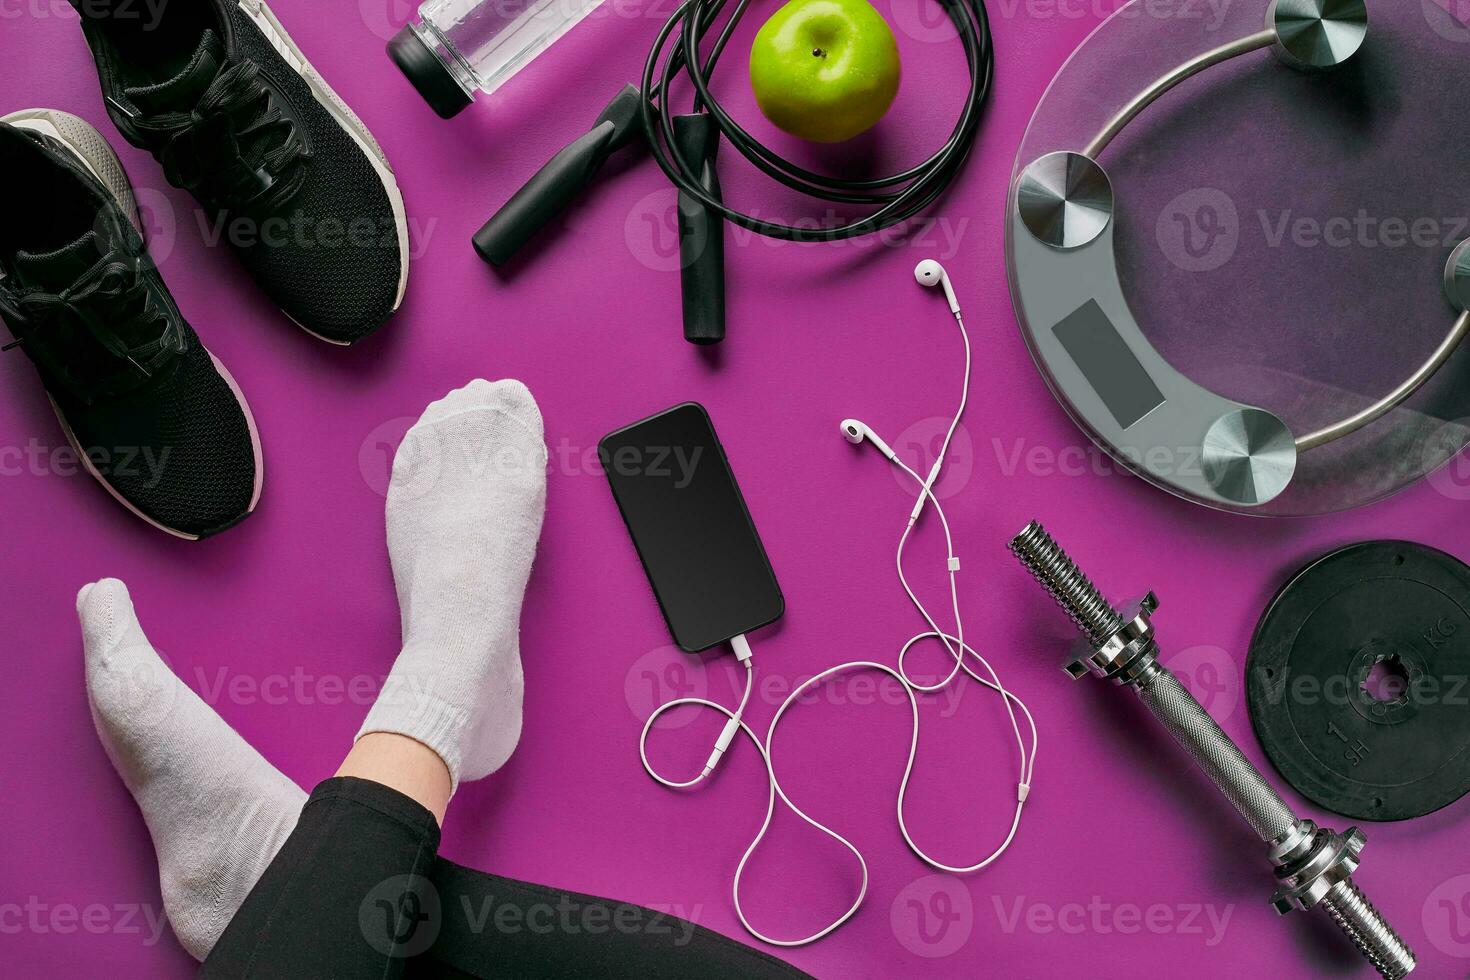 Flat lay gym equipment such as jump rope, bottle of waters, smartphone with headphone, apple and human legs in socks on color background. photo